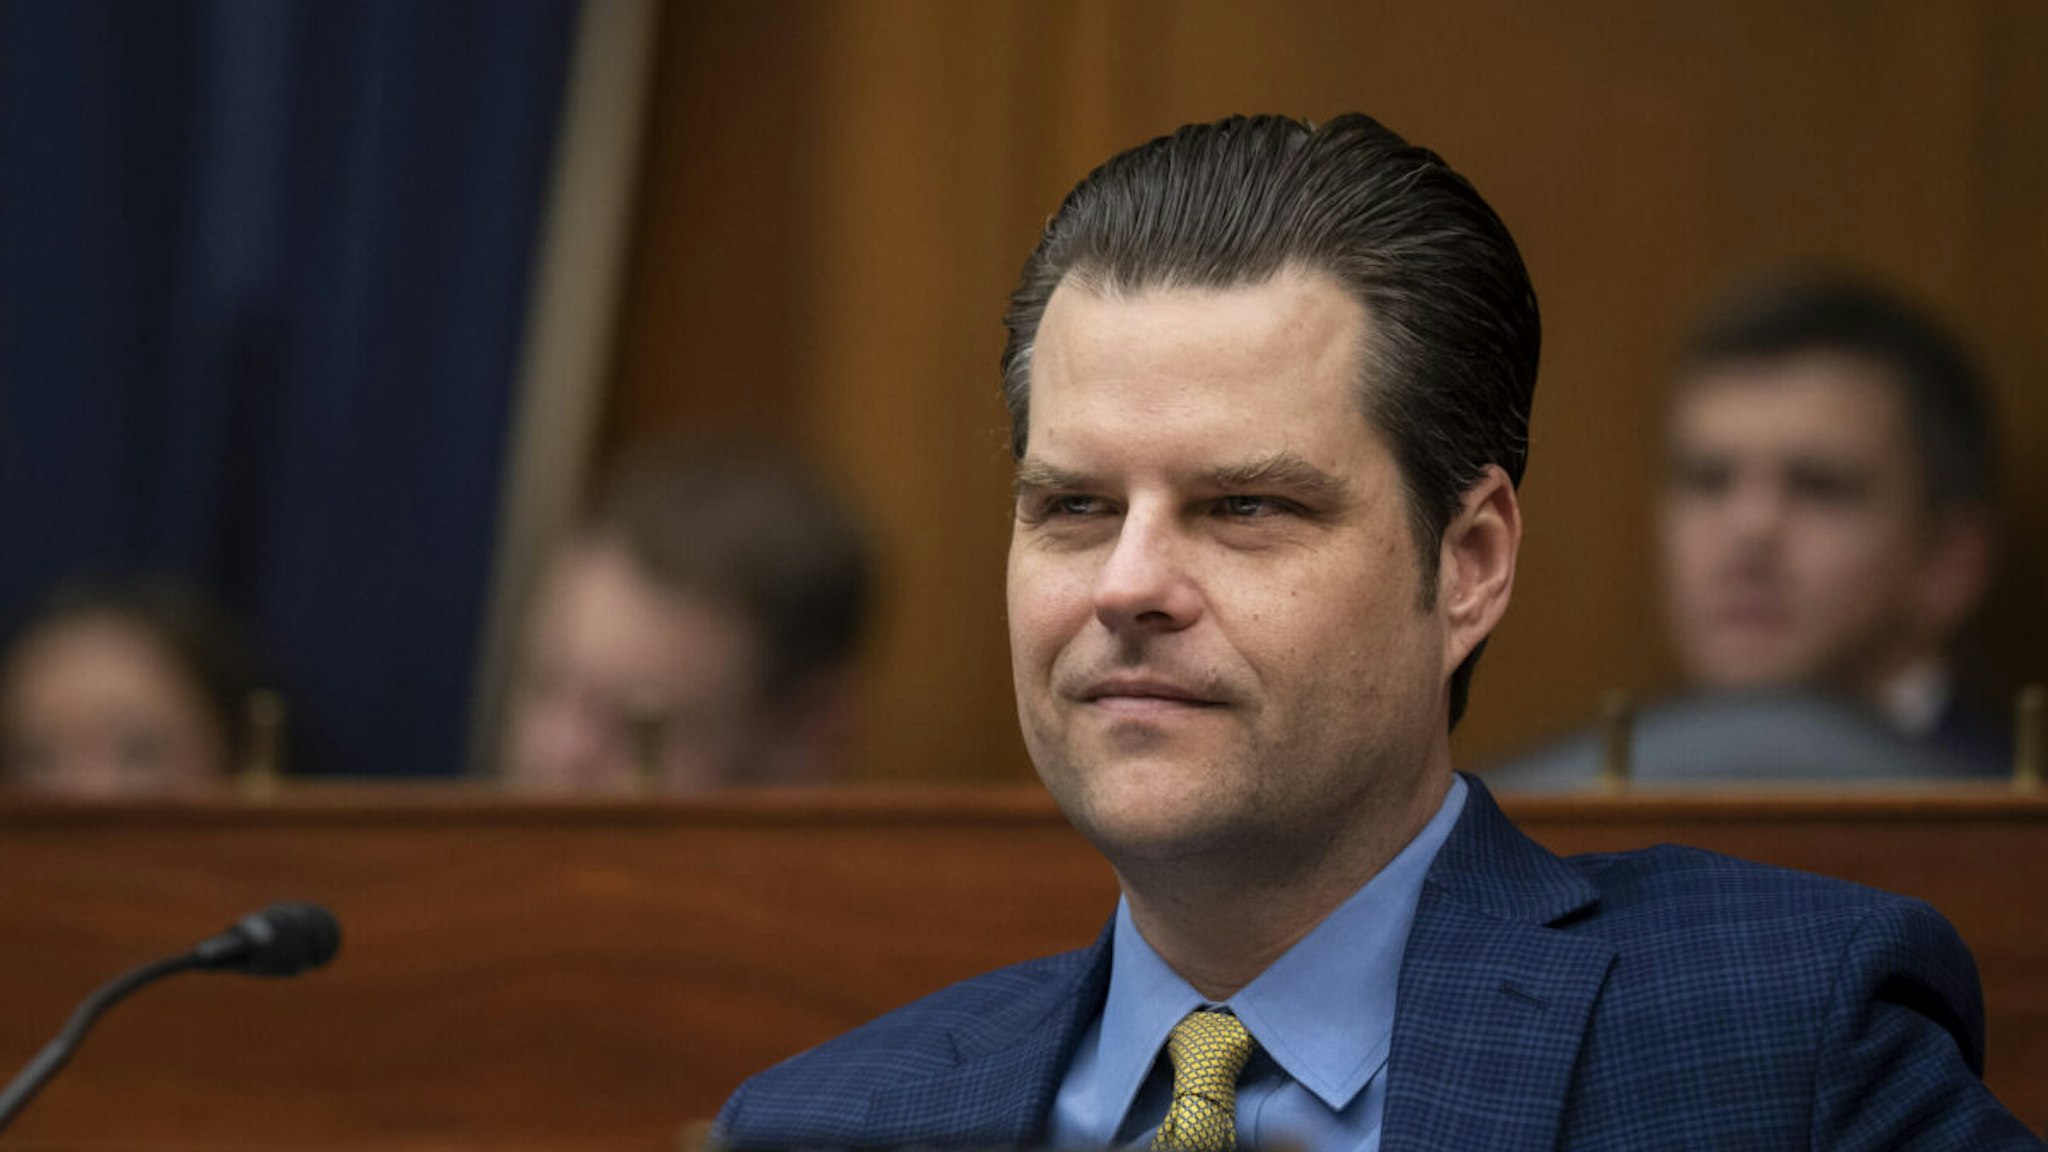 Rep. Matt Gaetz (R-FL) attends a House Armed Services Subcommittee on Cyber, Information Technologies and Innovation hearing about artificial intelligence on Capitol Hill July 18, 2023 in Washington, DC.